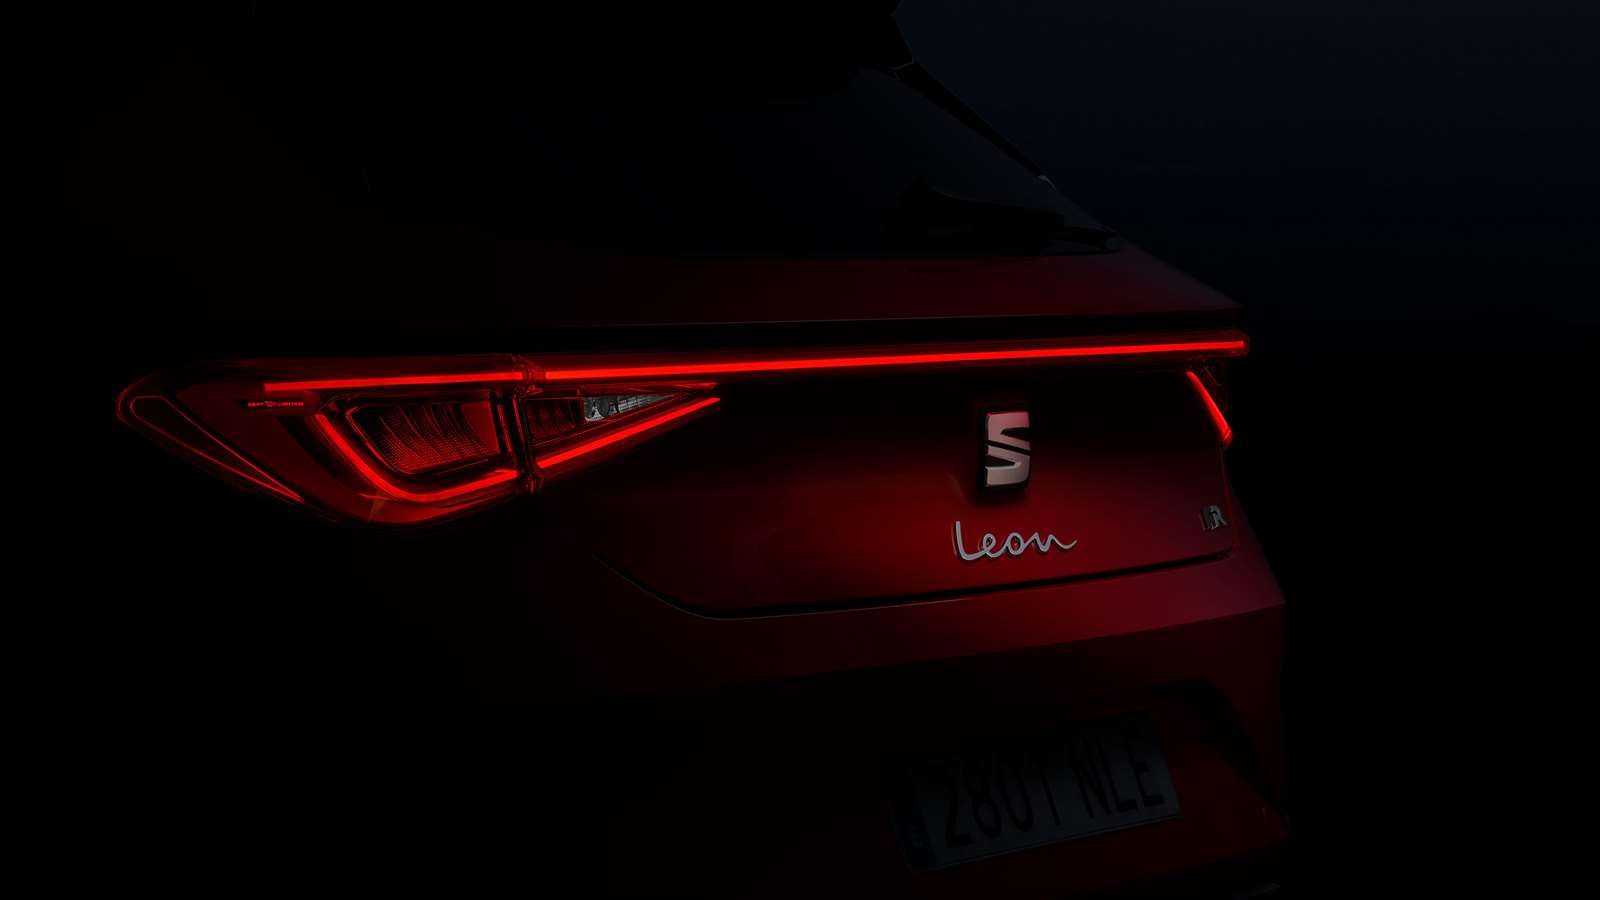 A Volkswagen Golf means a new Seat Leon